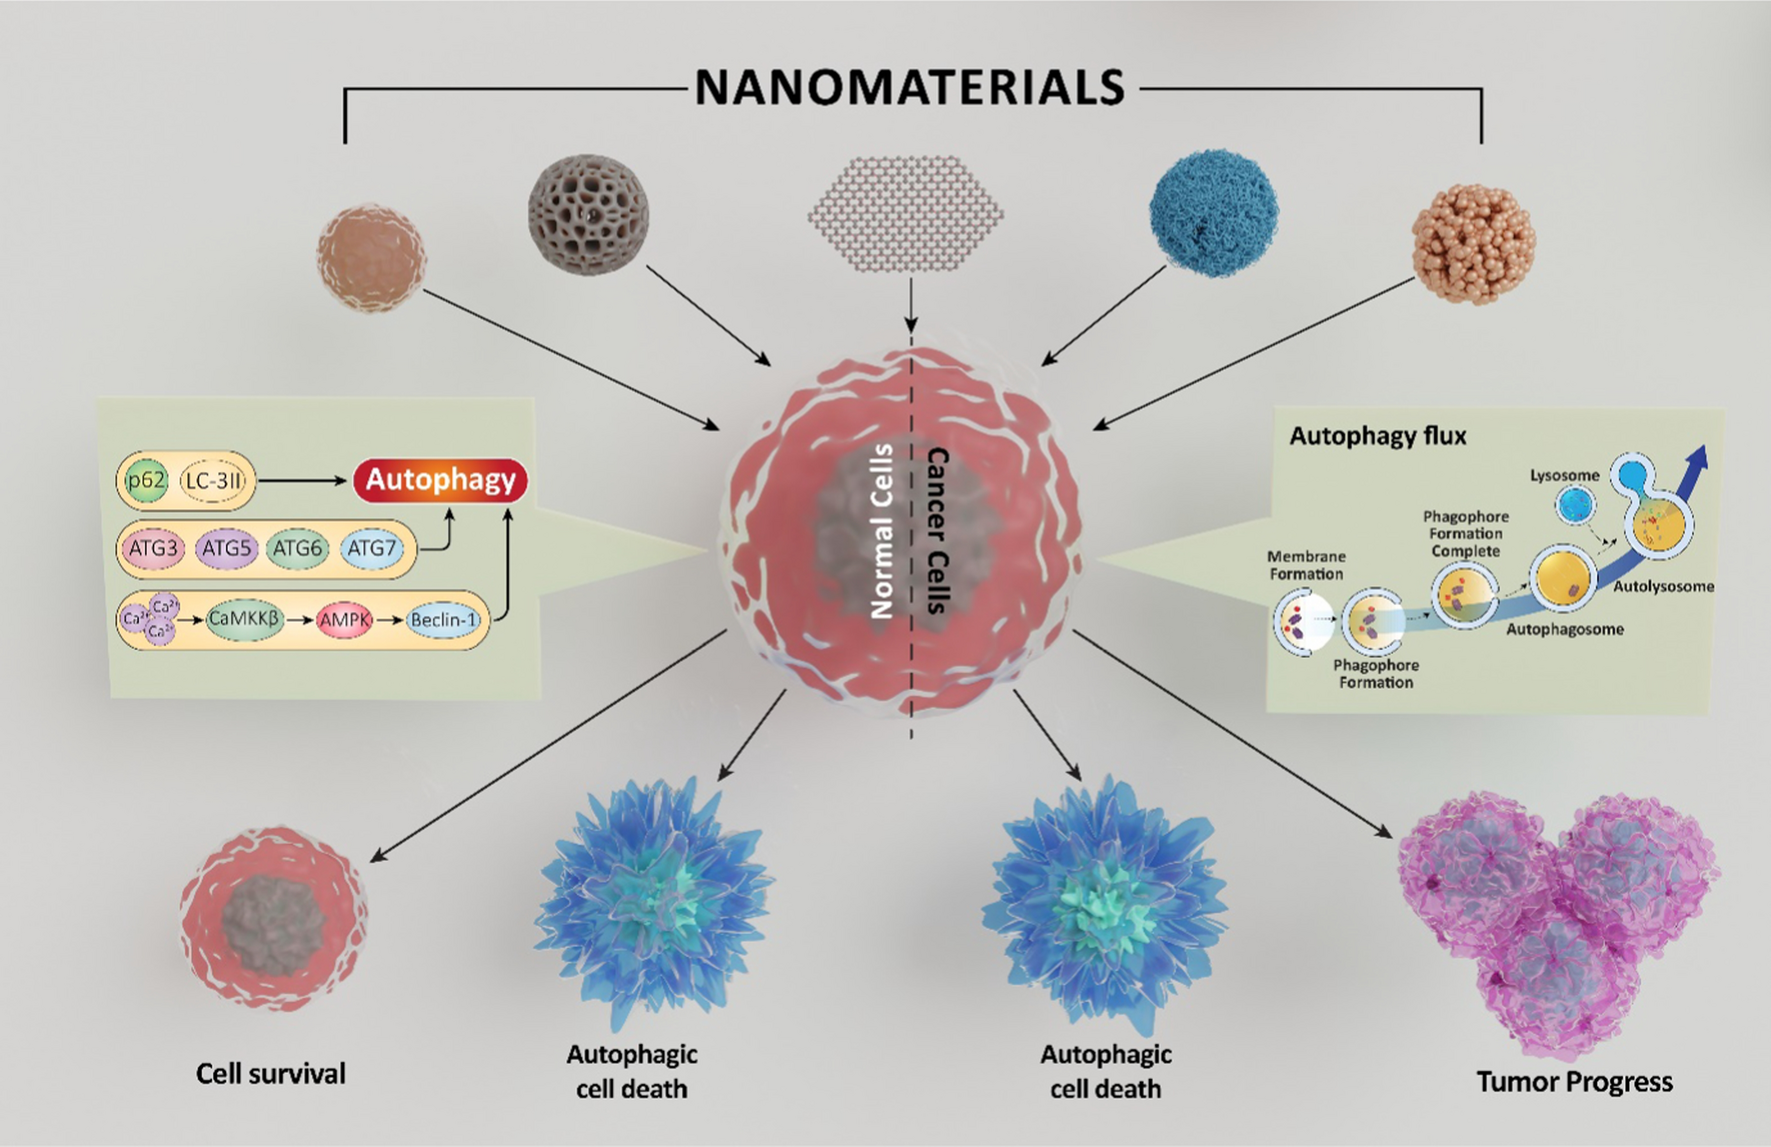 The impact of nanomaterials on autophagy across health and disease conditions